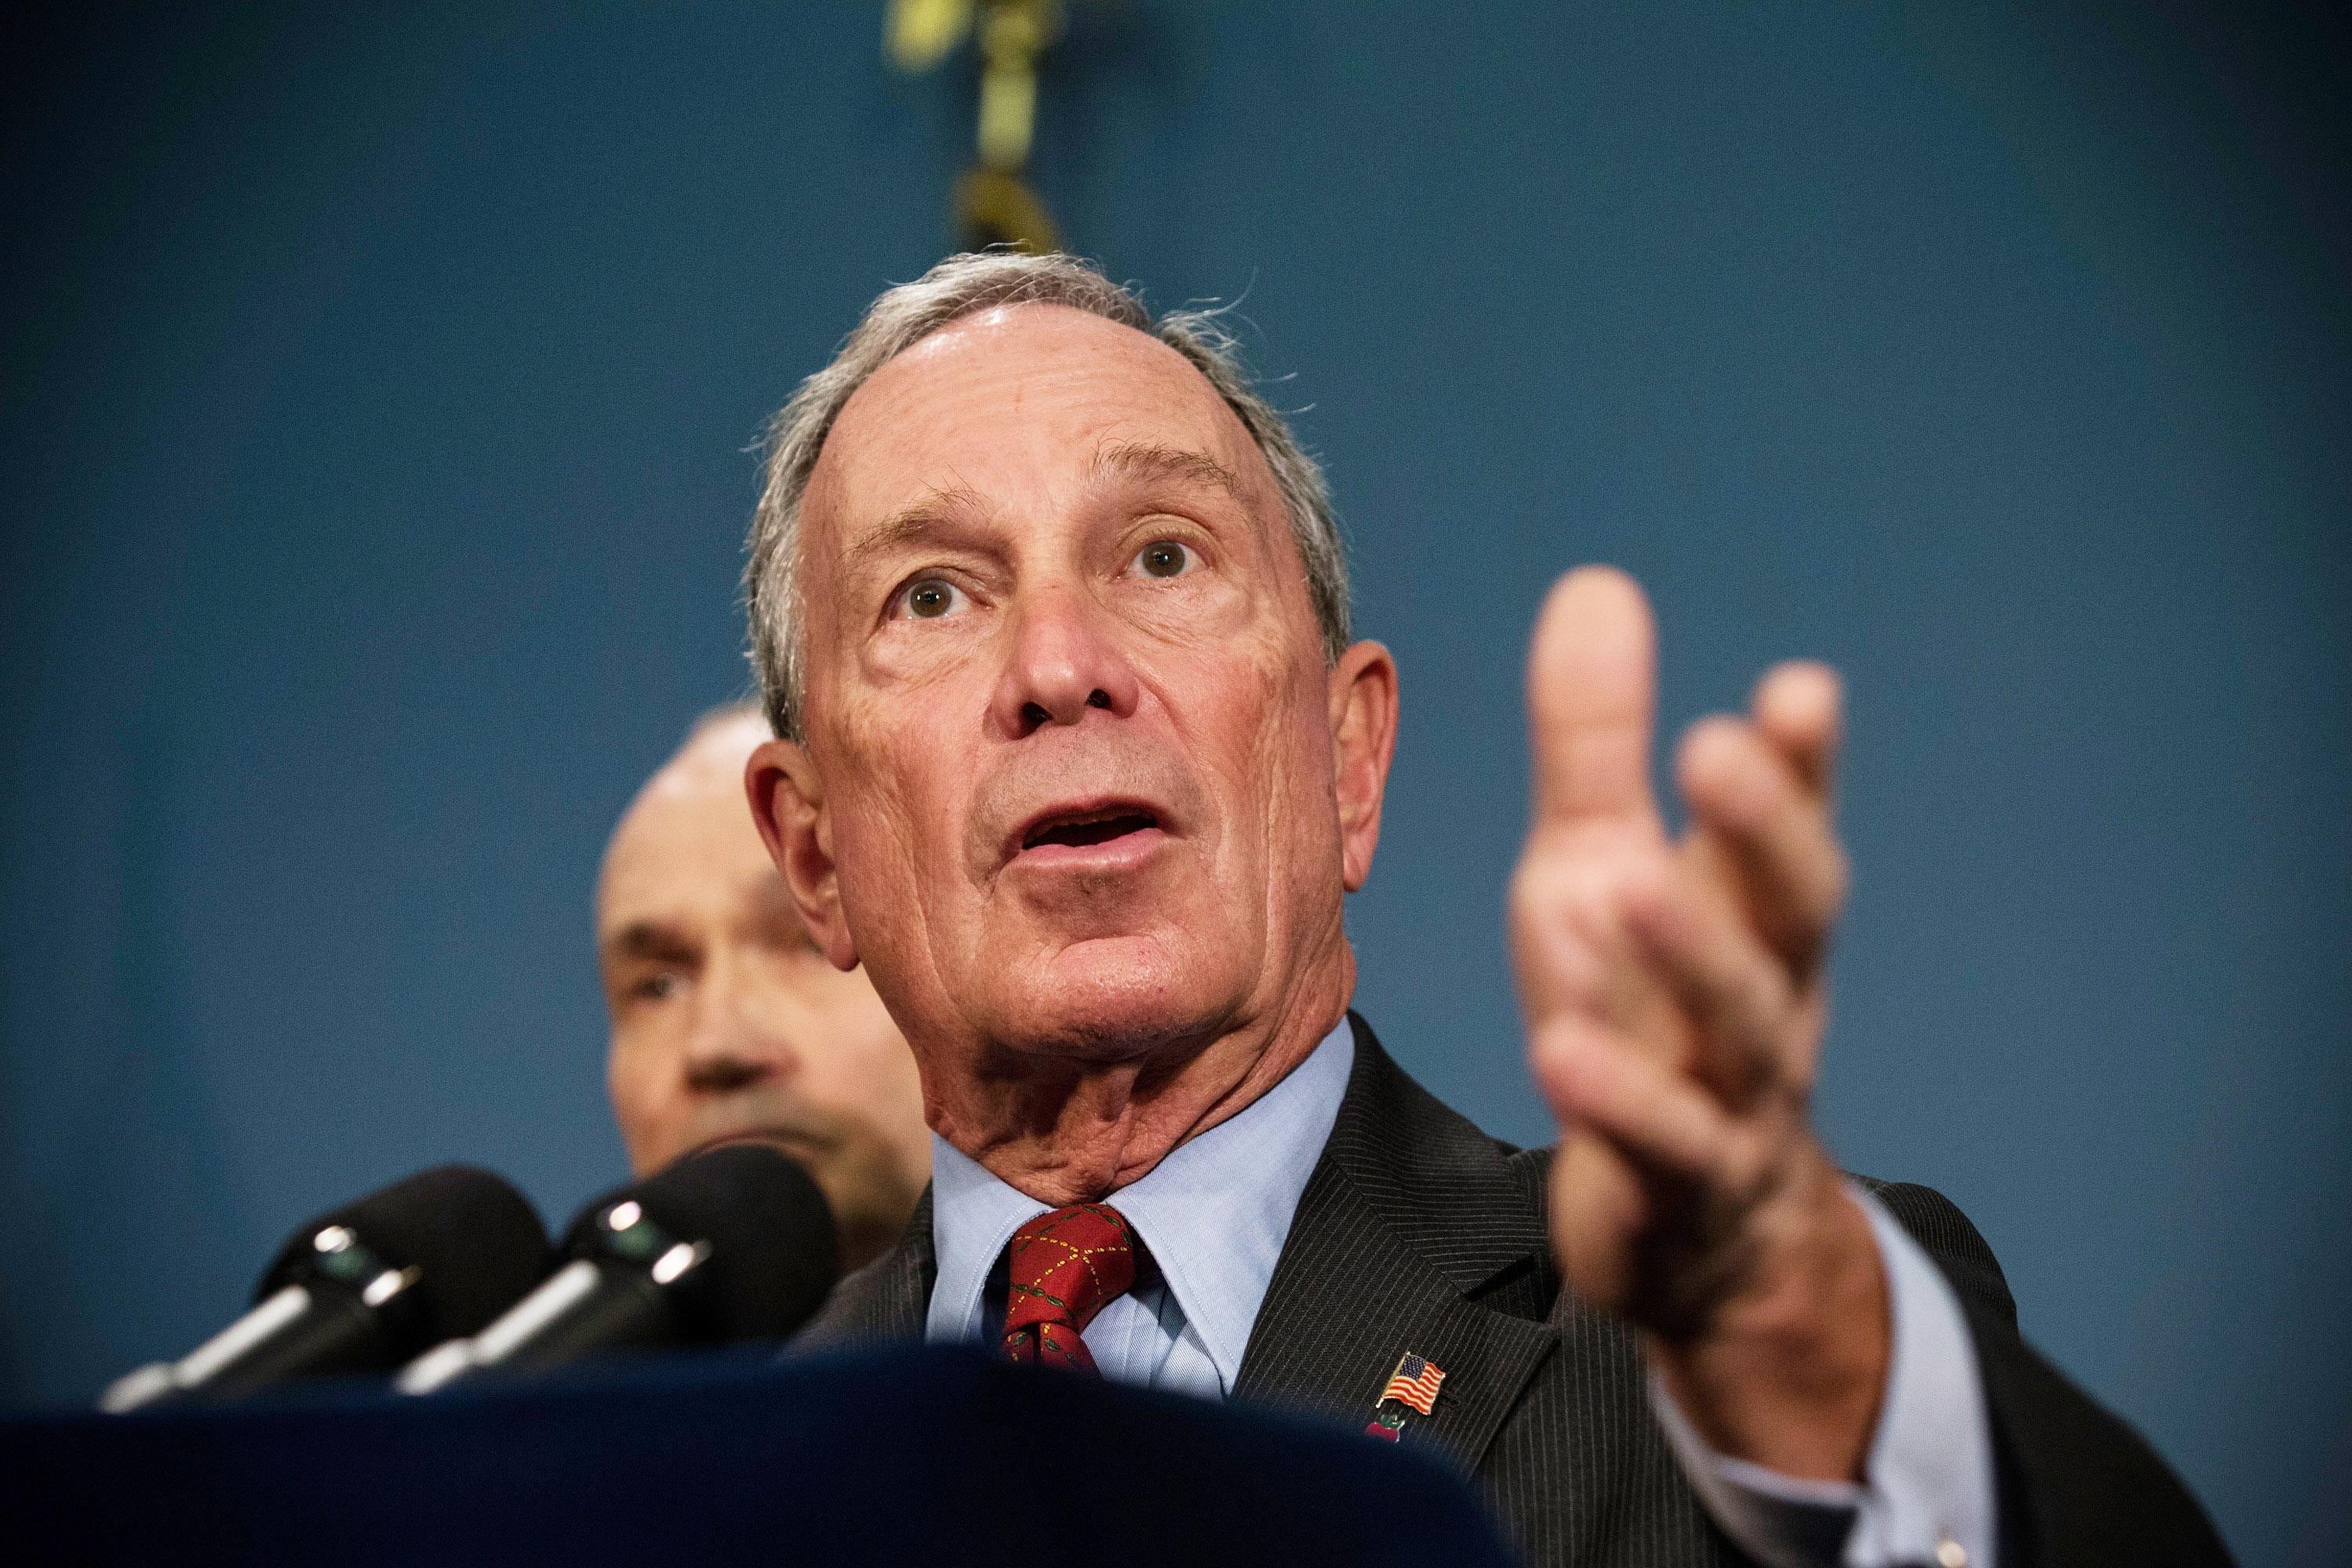 Michael Bloomberg speaks into a microphone and raises his hand.